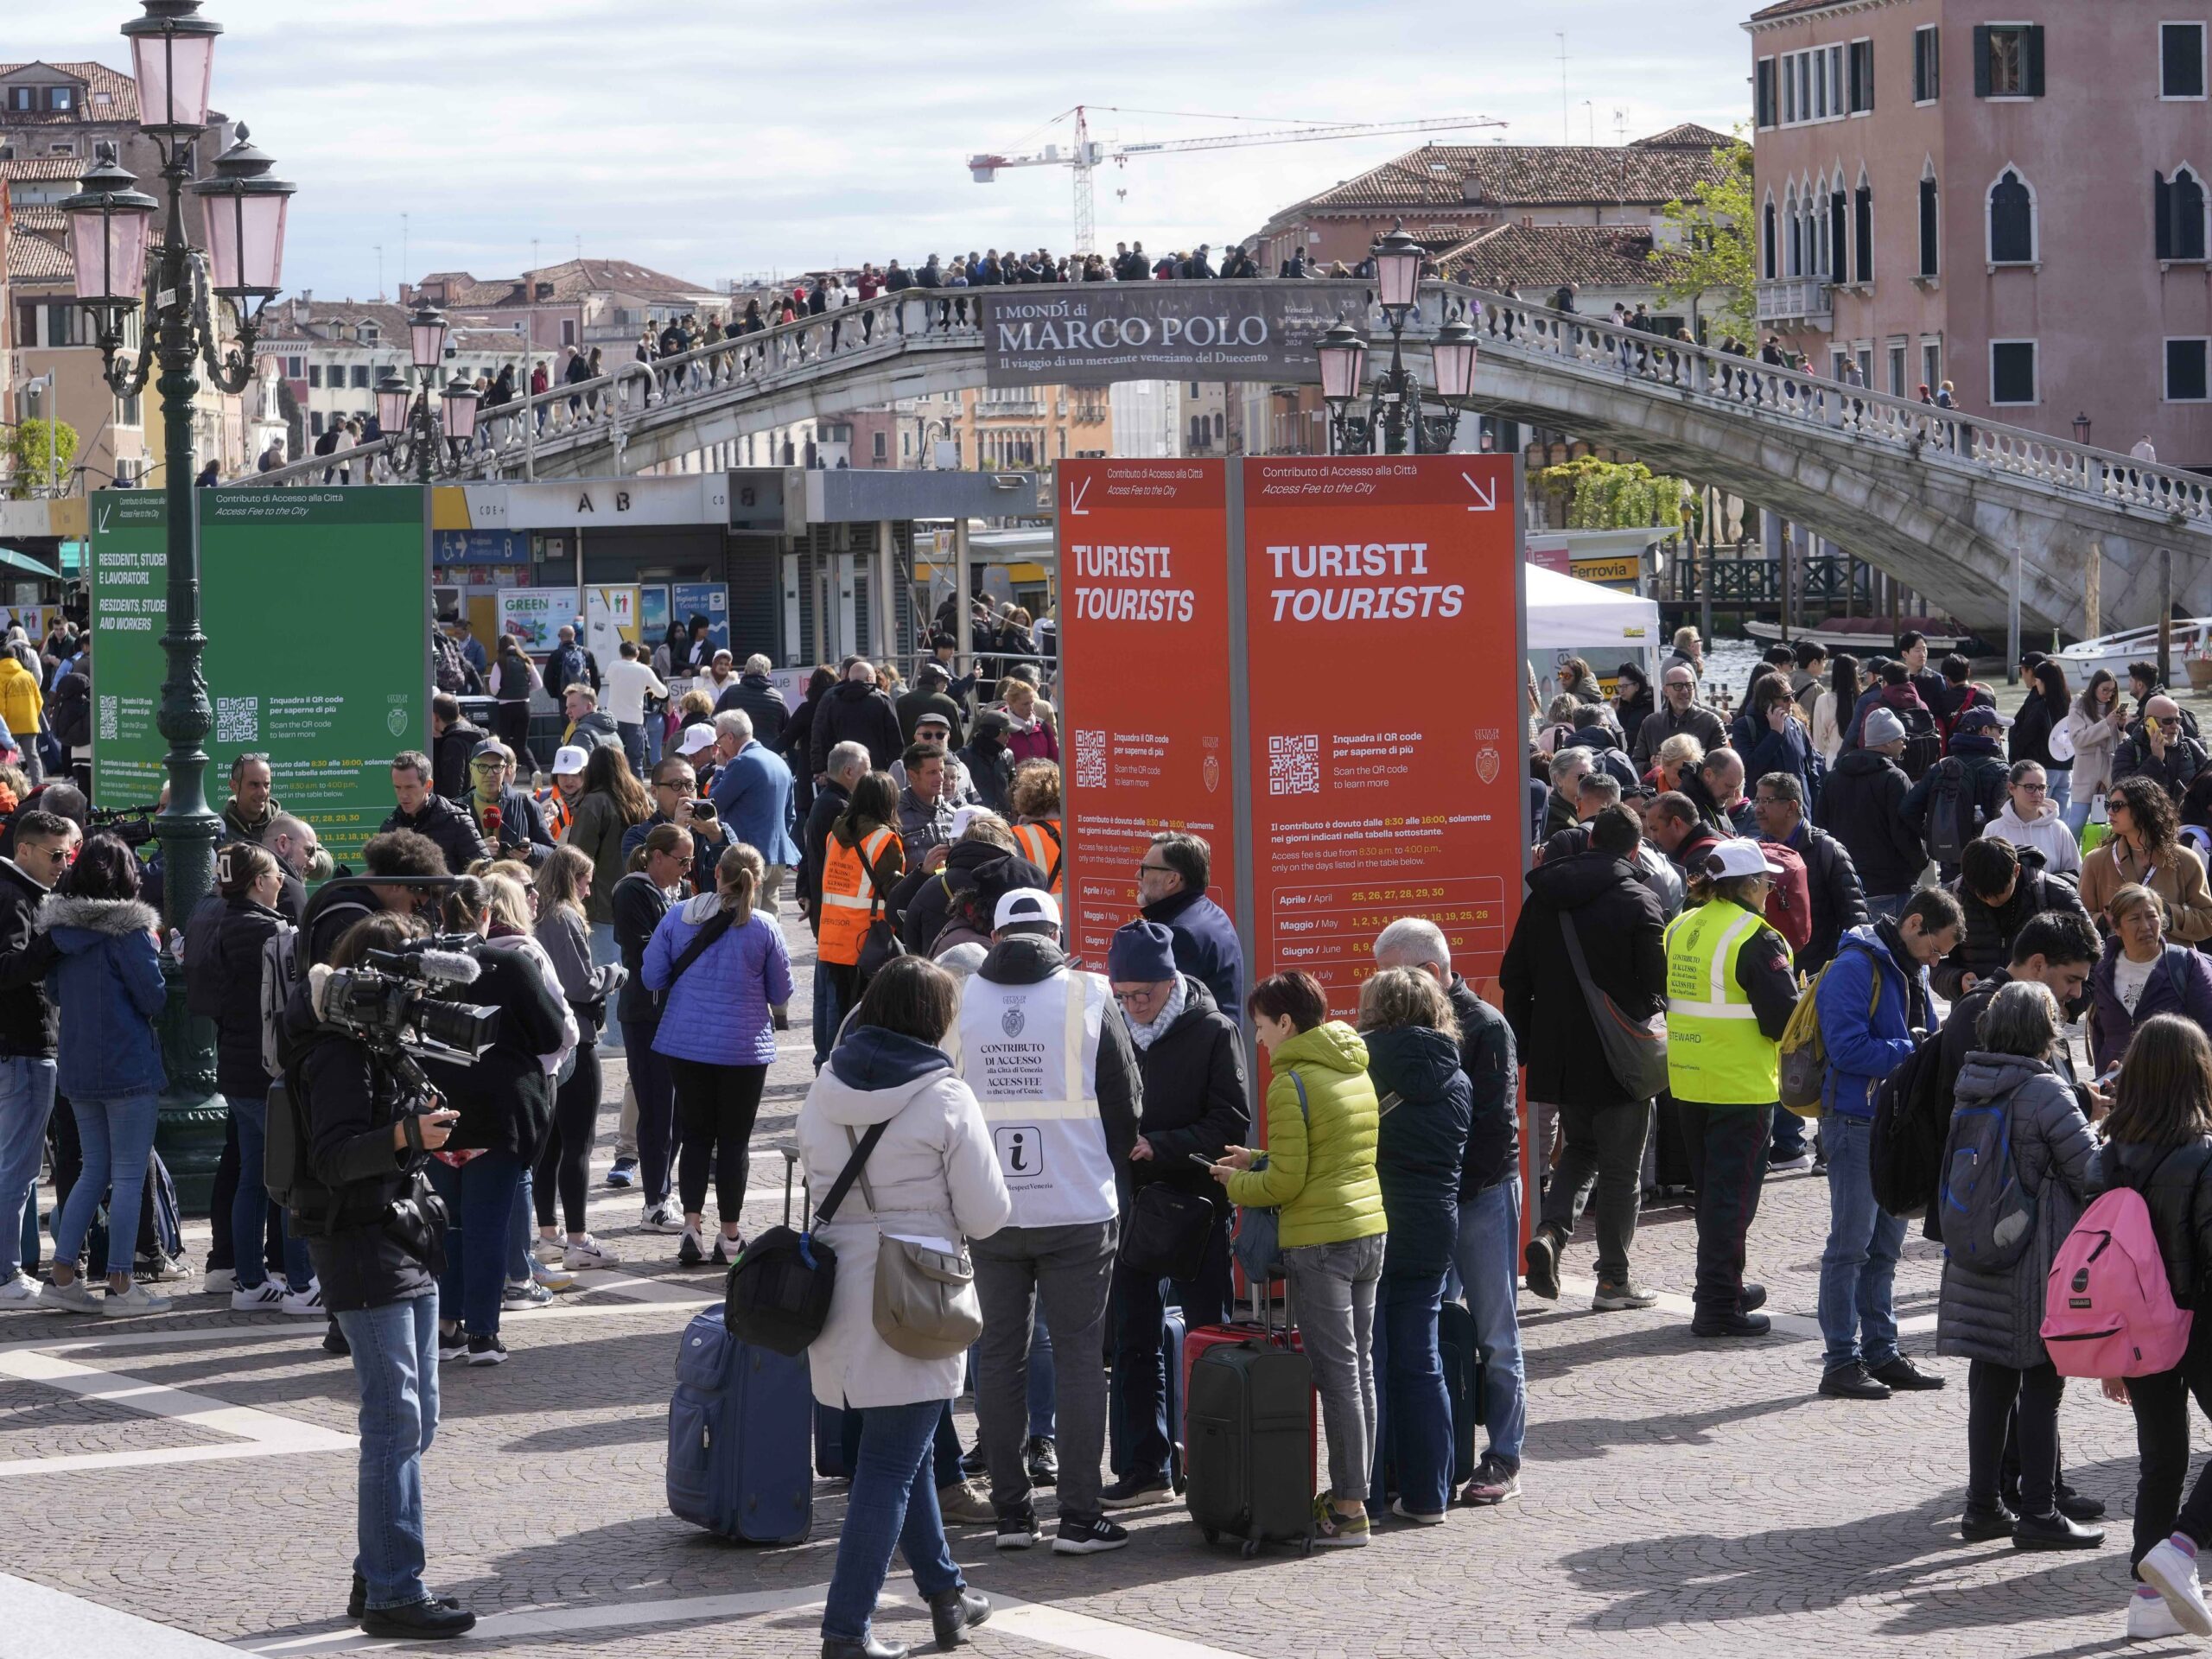 Stewards check tourists' QR code access outside the main train station in Venice, Italy, on Thursday.